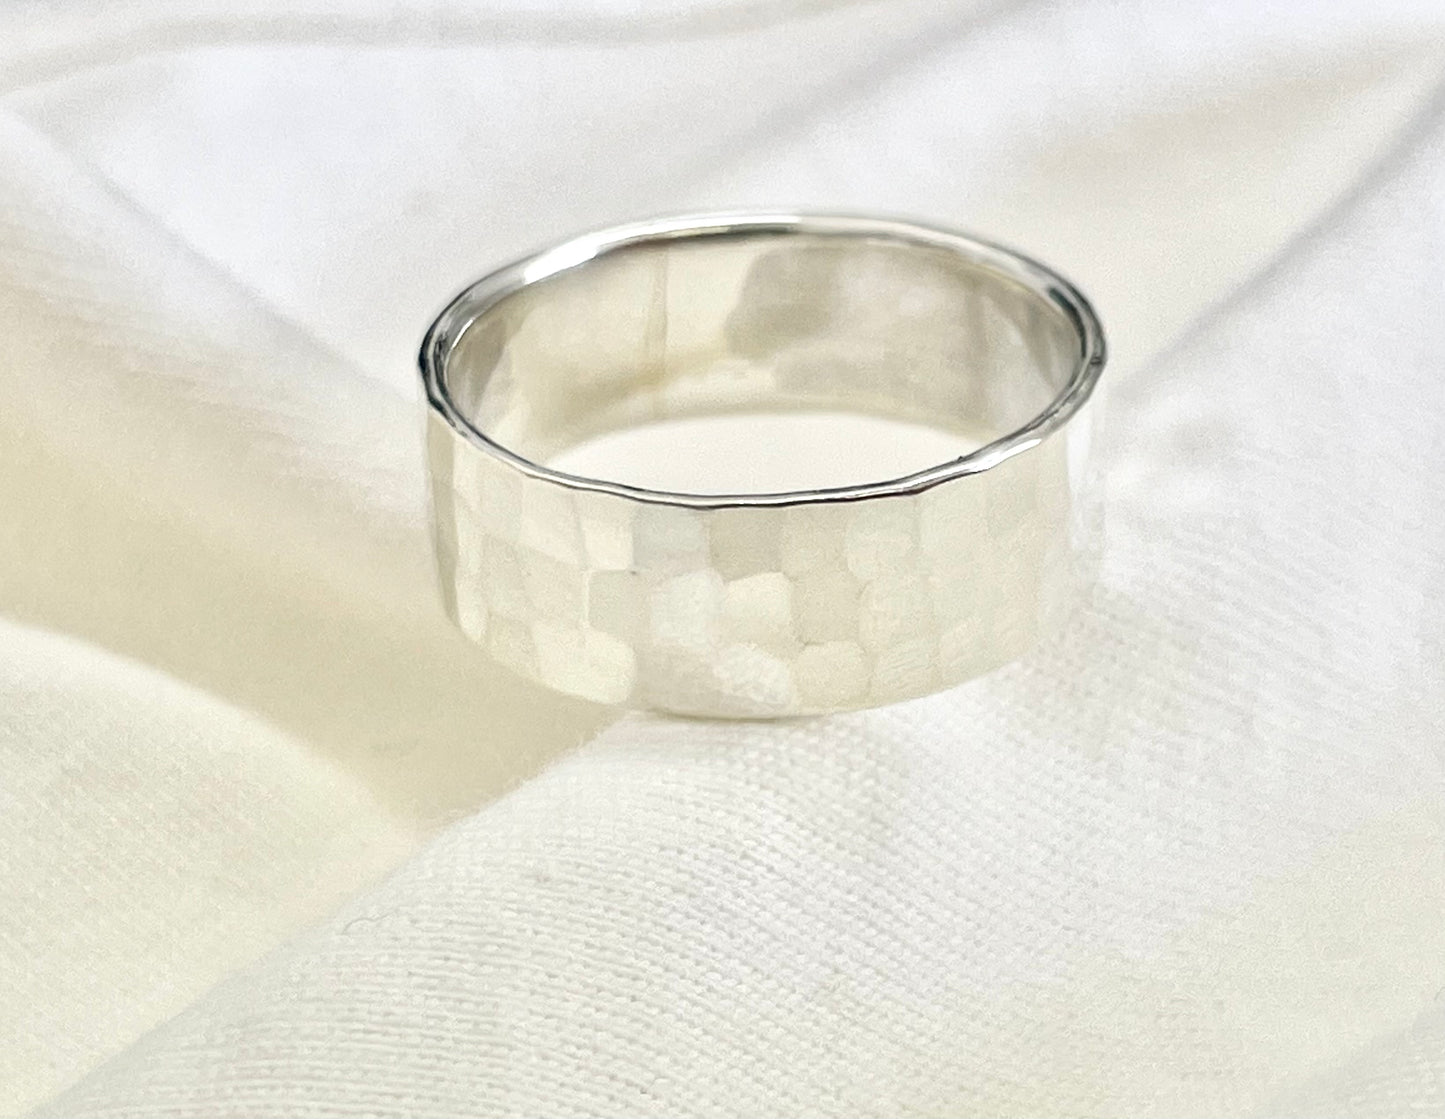 Large Hammered Silver Ring